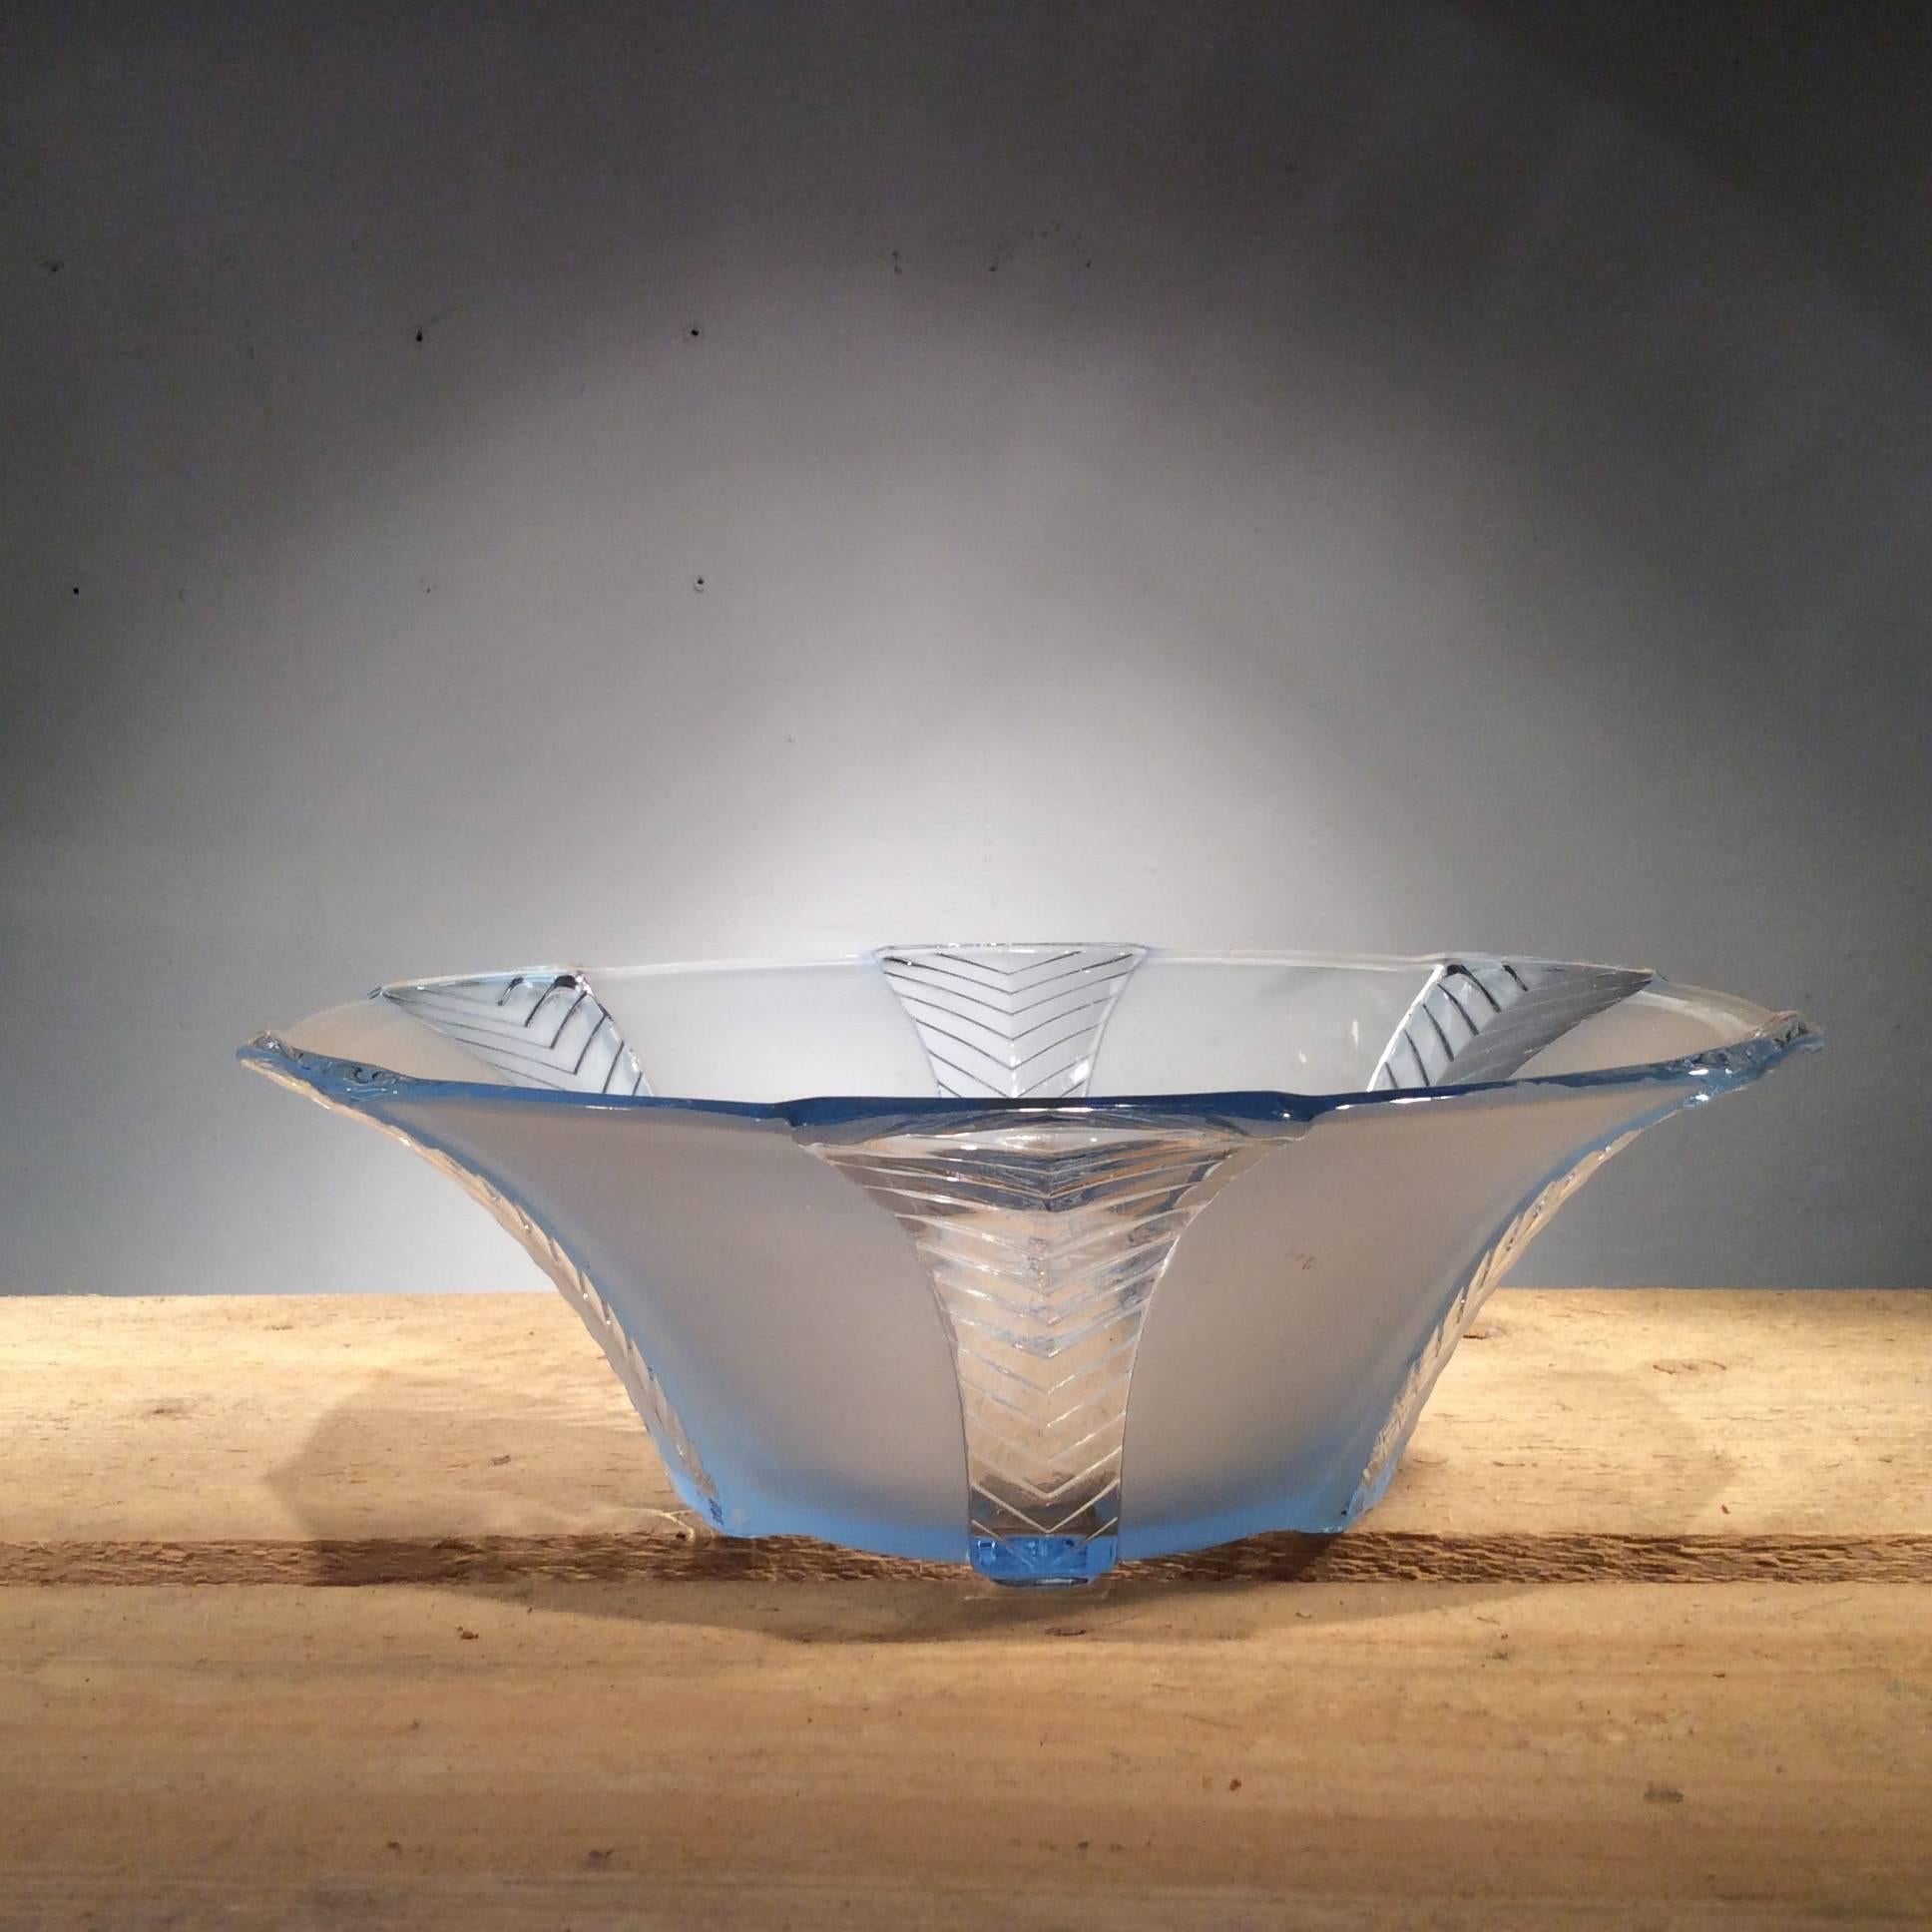 Striking 1930s frosted and clear blue glass serving bowl comes complete with a set of four individual bowls and saucers. Perfect for serving up colorful fruit salads or purely for decoration.

In excellent condition this Art Deco set is a real